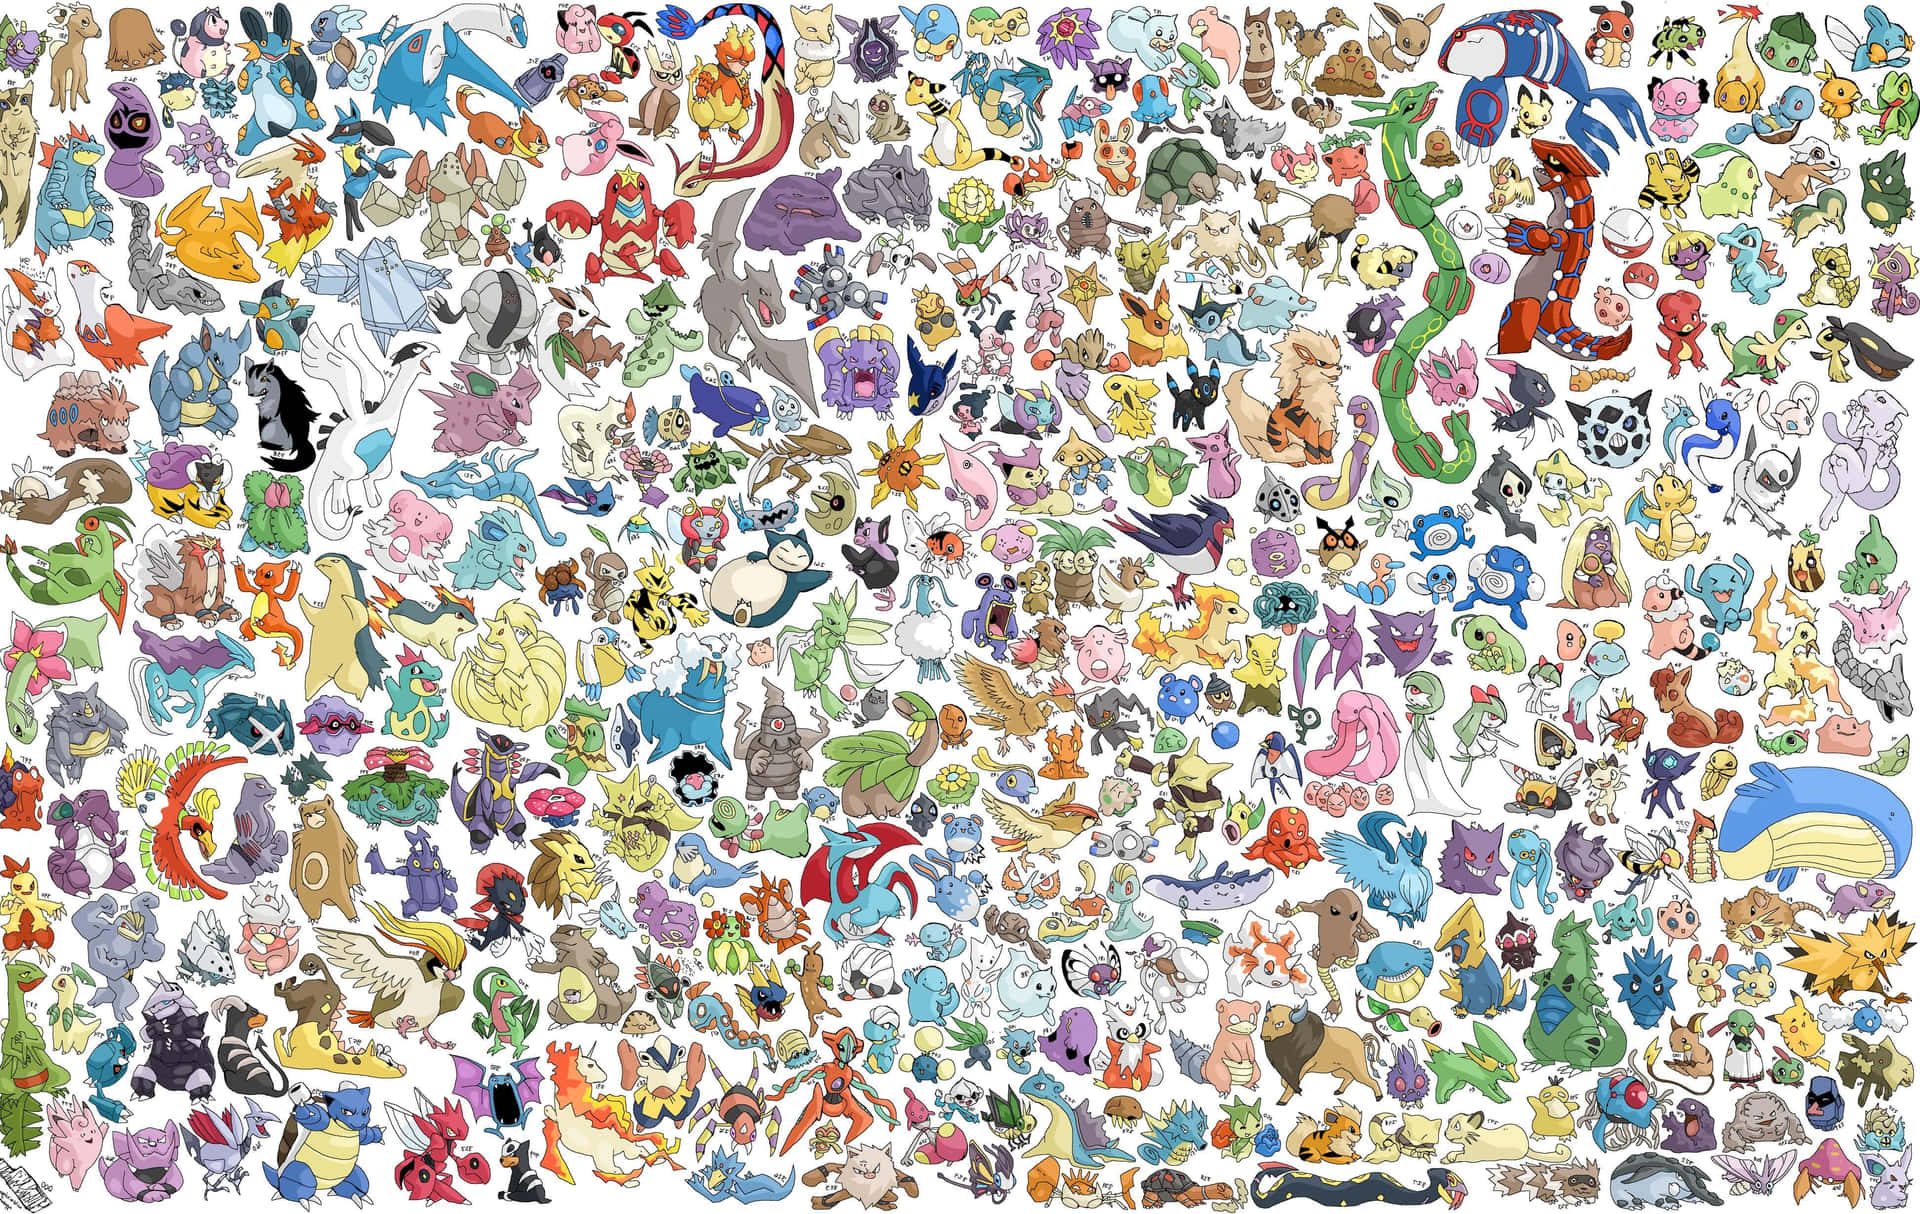 Desktop Theme With Every Pokemon Character Wallpaper